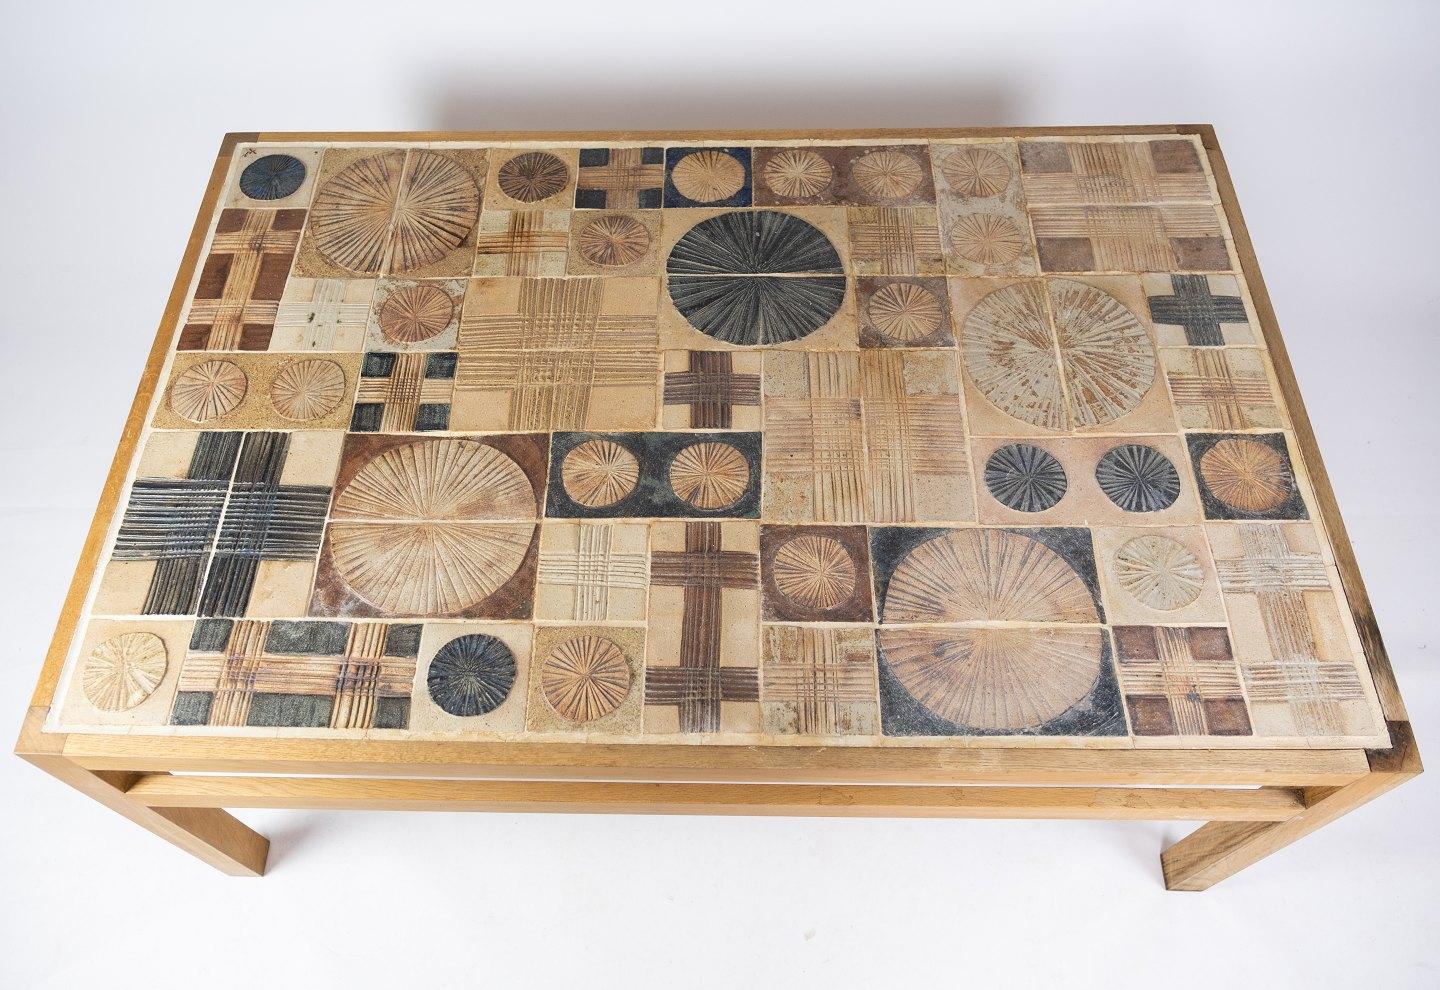 Danish Coffee Table in Oak and with Different Tiles, Designed by Tue Poulsen, 1970s